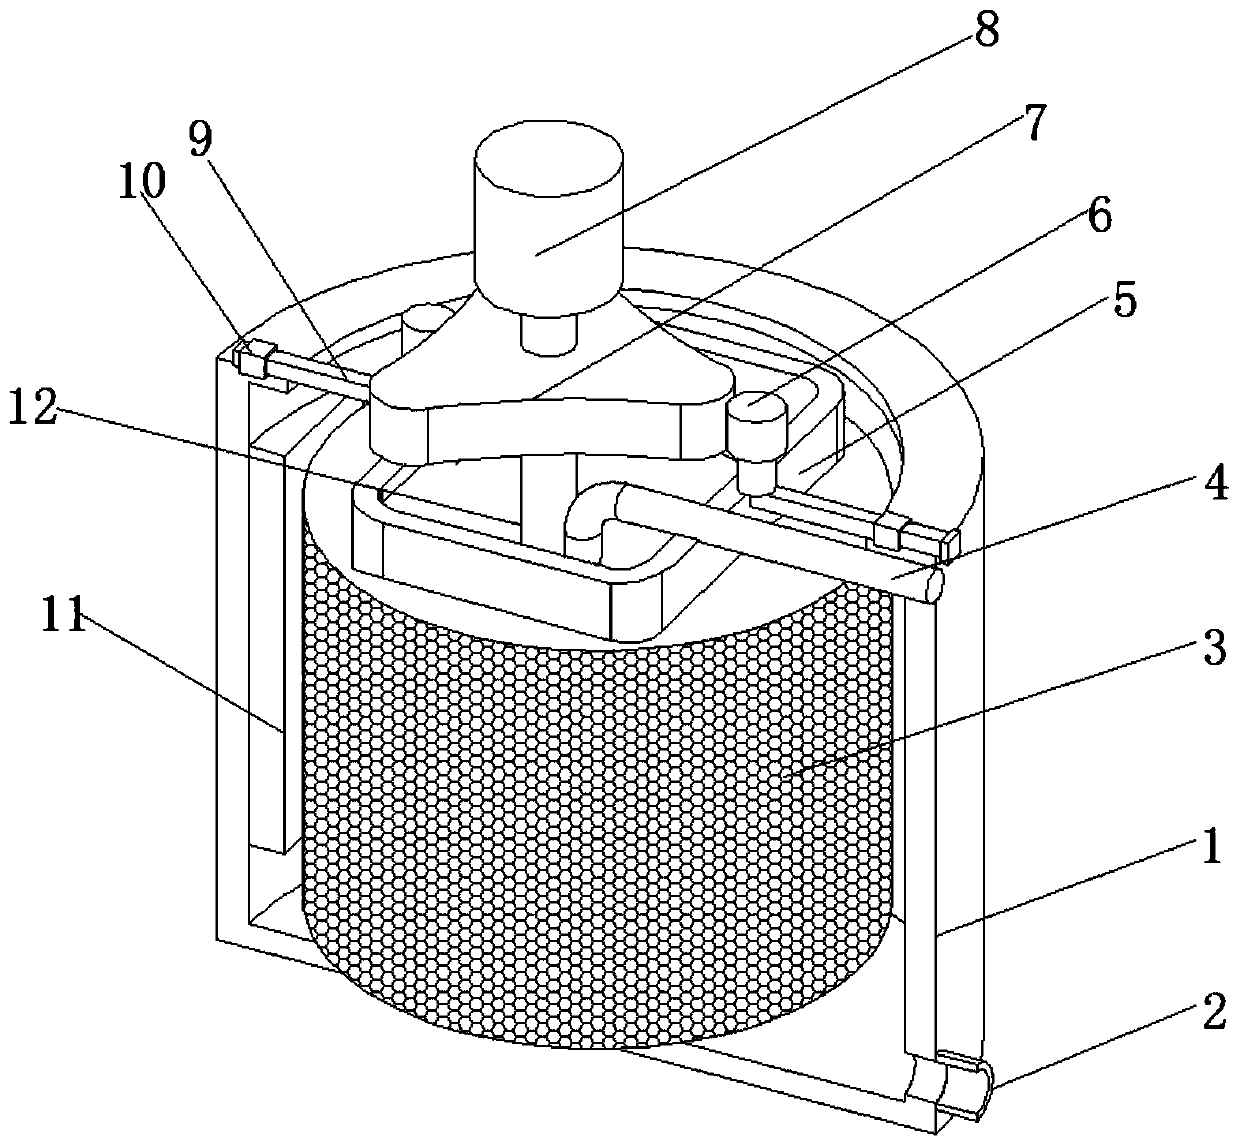 Sewage treatment device for collecting hair based on cam circulating oscillation